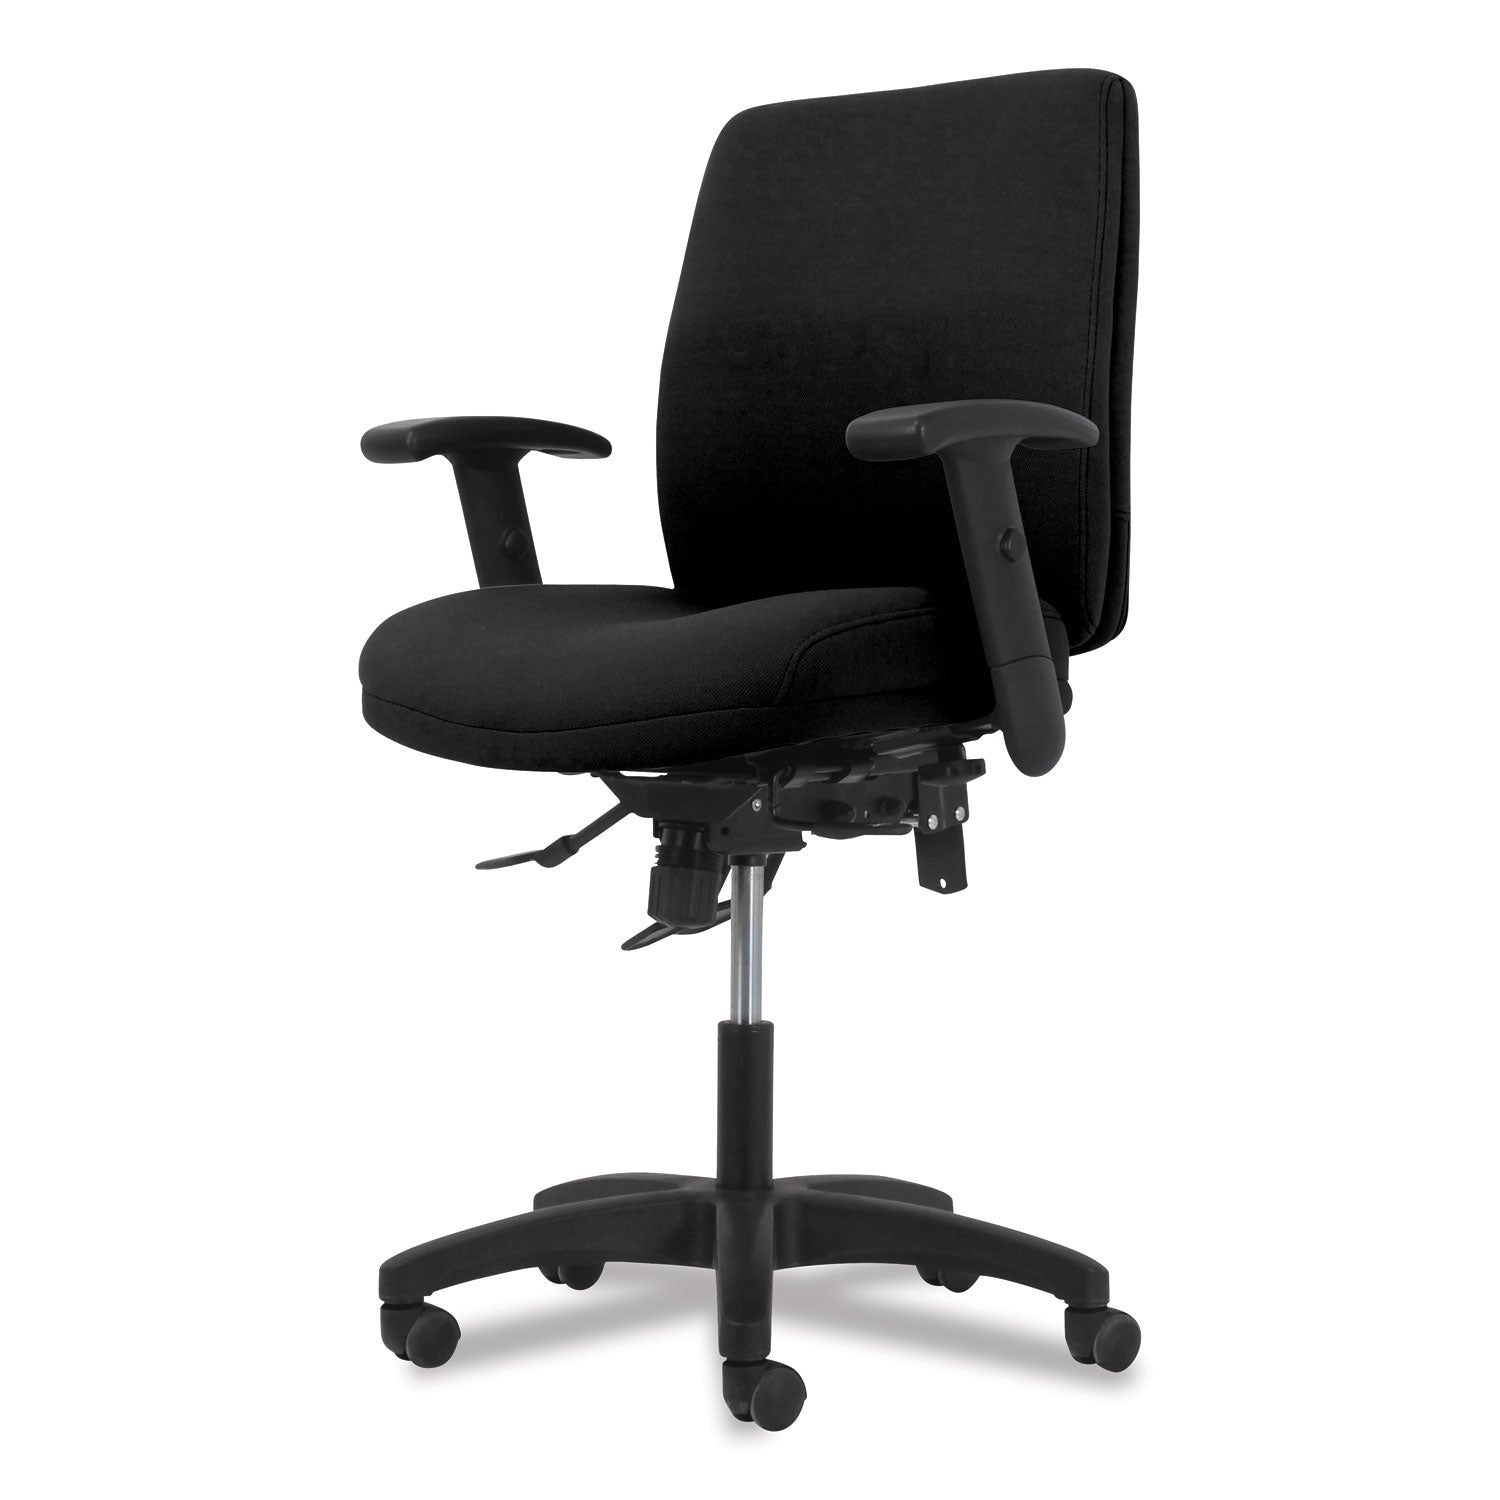 network-mid-back-task-chair-supports-up-to-250-lb-183-to-228-seat-height-black_honvl282a2va10t - 6